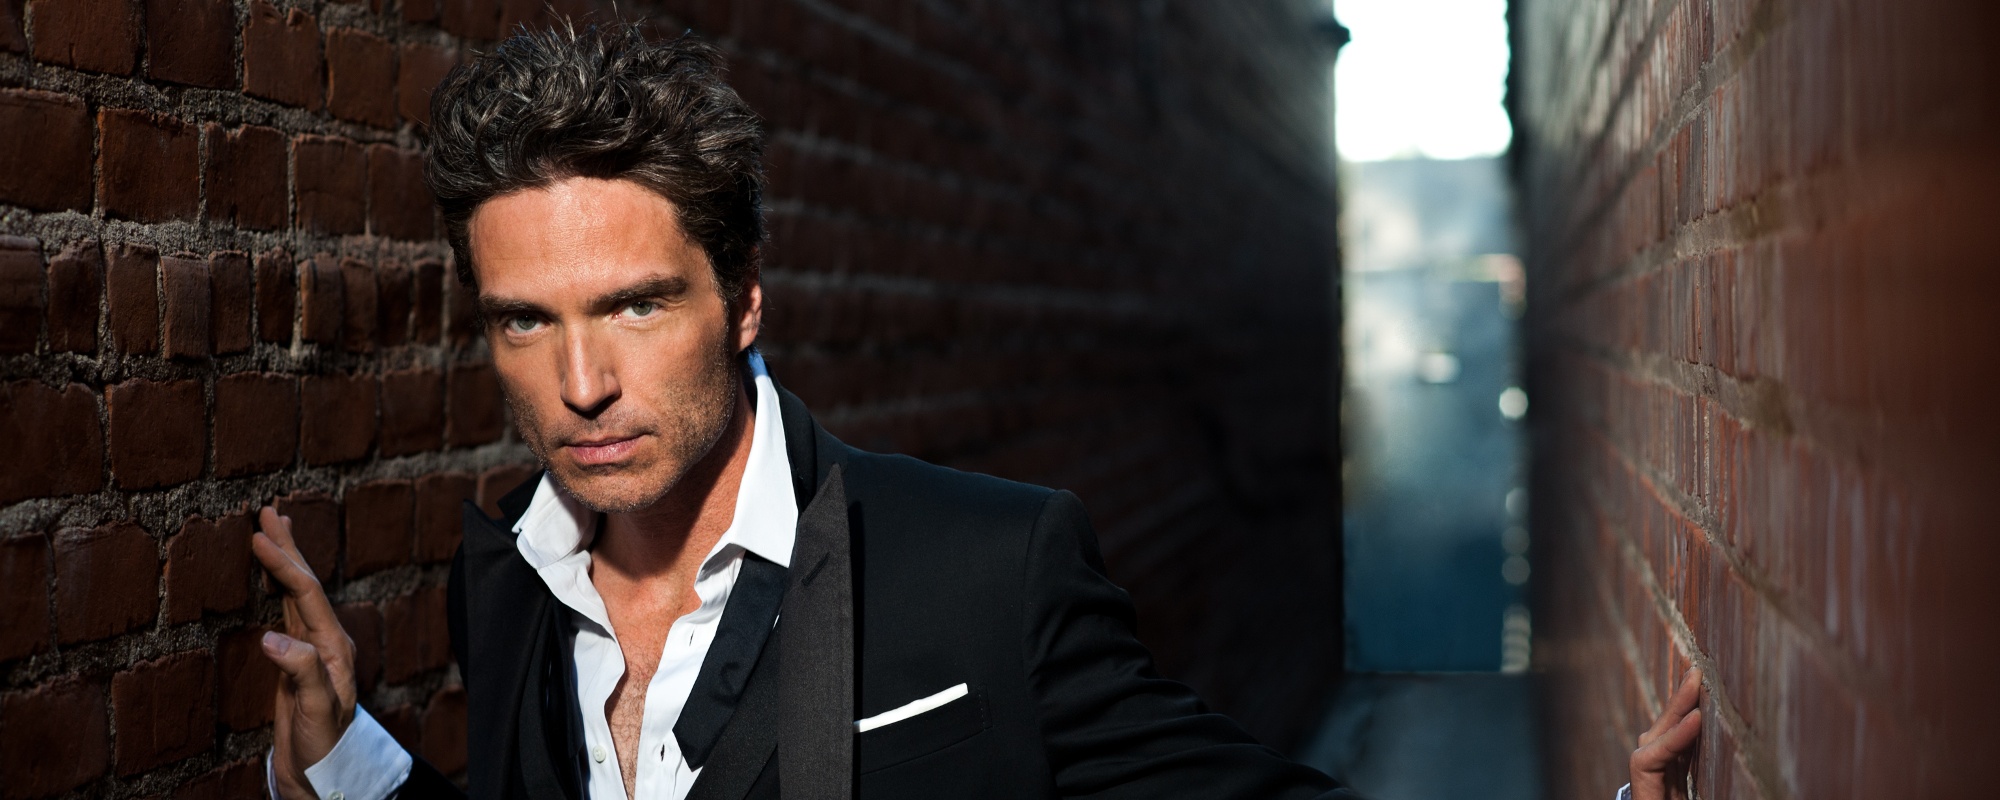 Singer/Songwriter Richard Marx Blasts “White Nationalists” and “Traitors” on Social Media